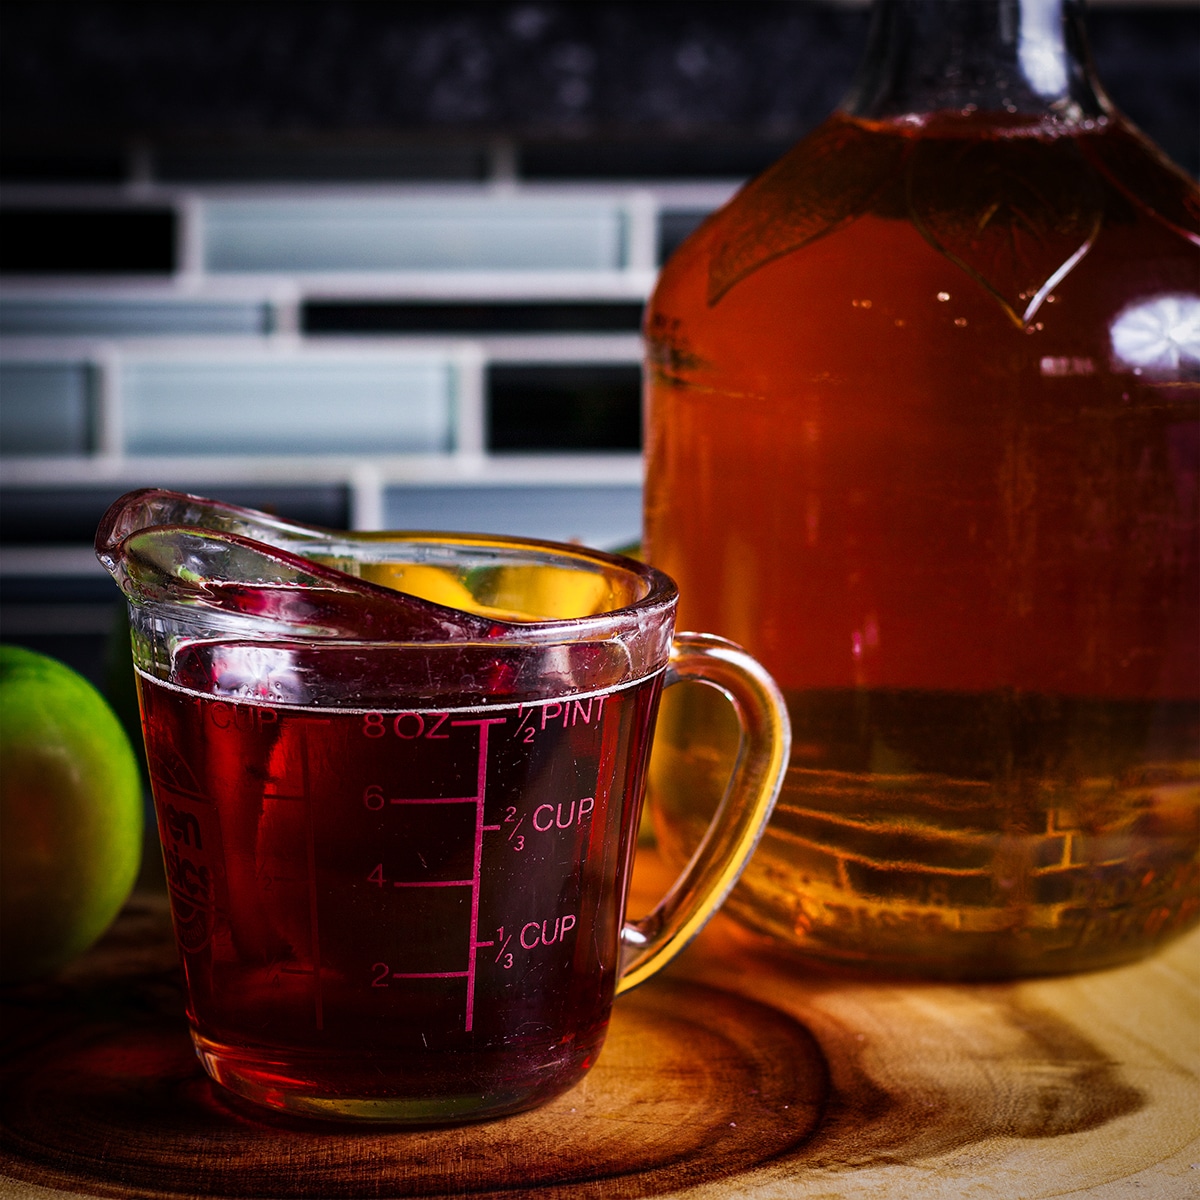 A glass measuring cup filled with apple cider that's been reduced into a thick syrup.